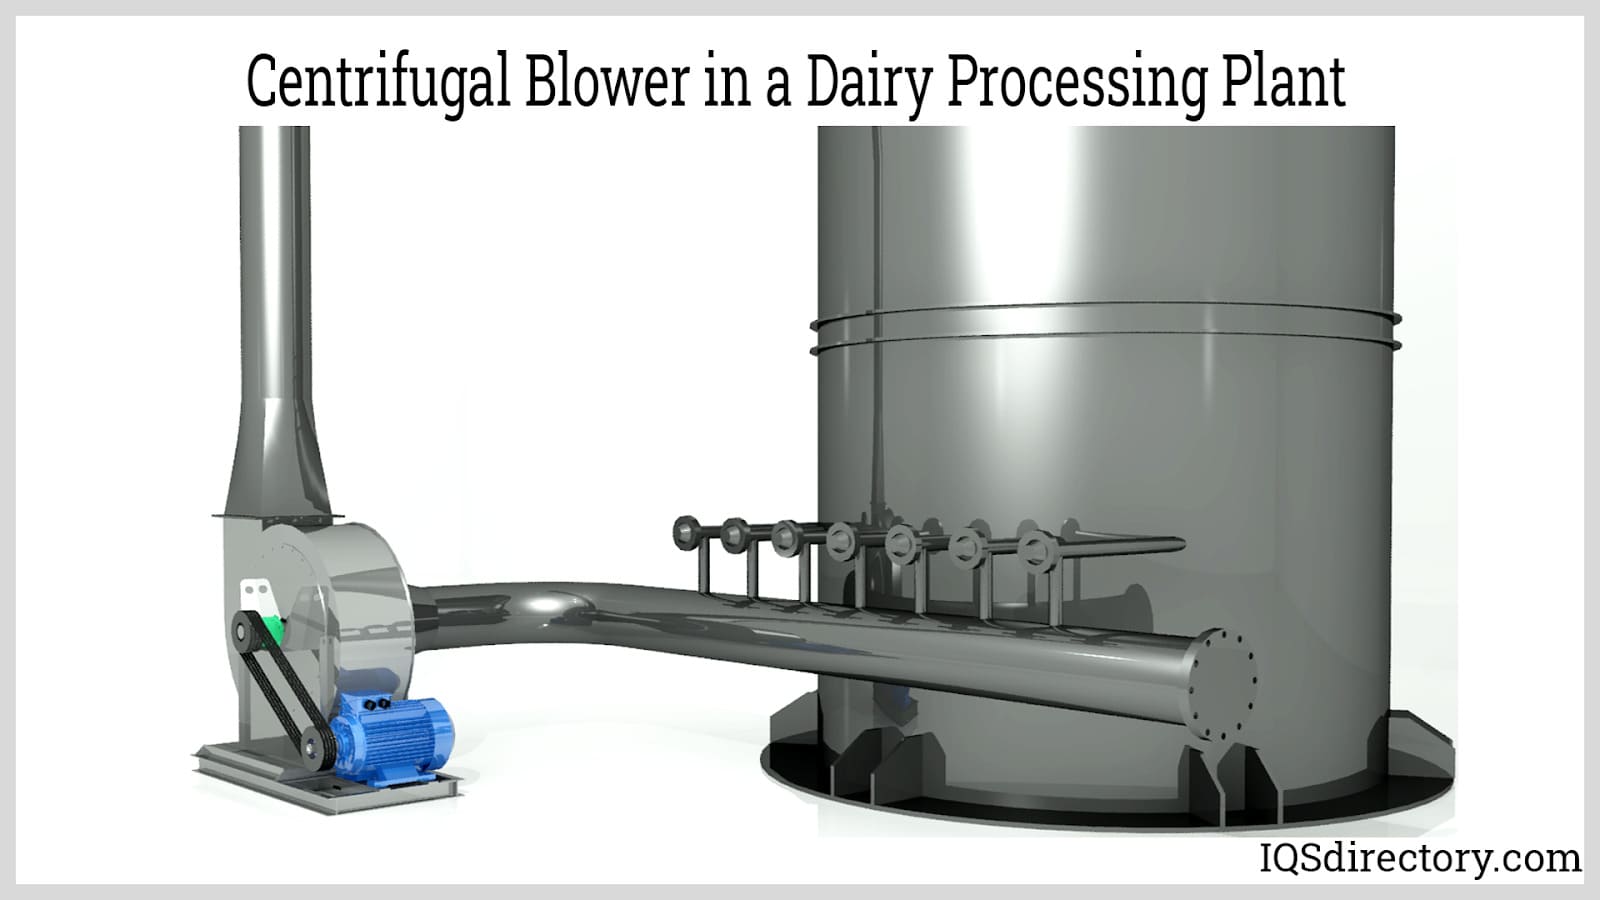 Centrifugal Blower in a Dairy Processing Plant